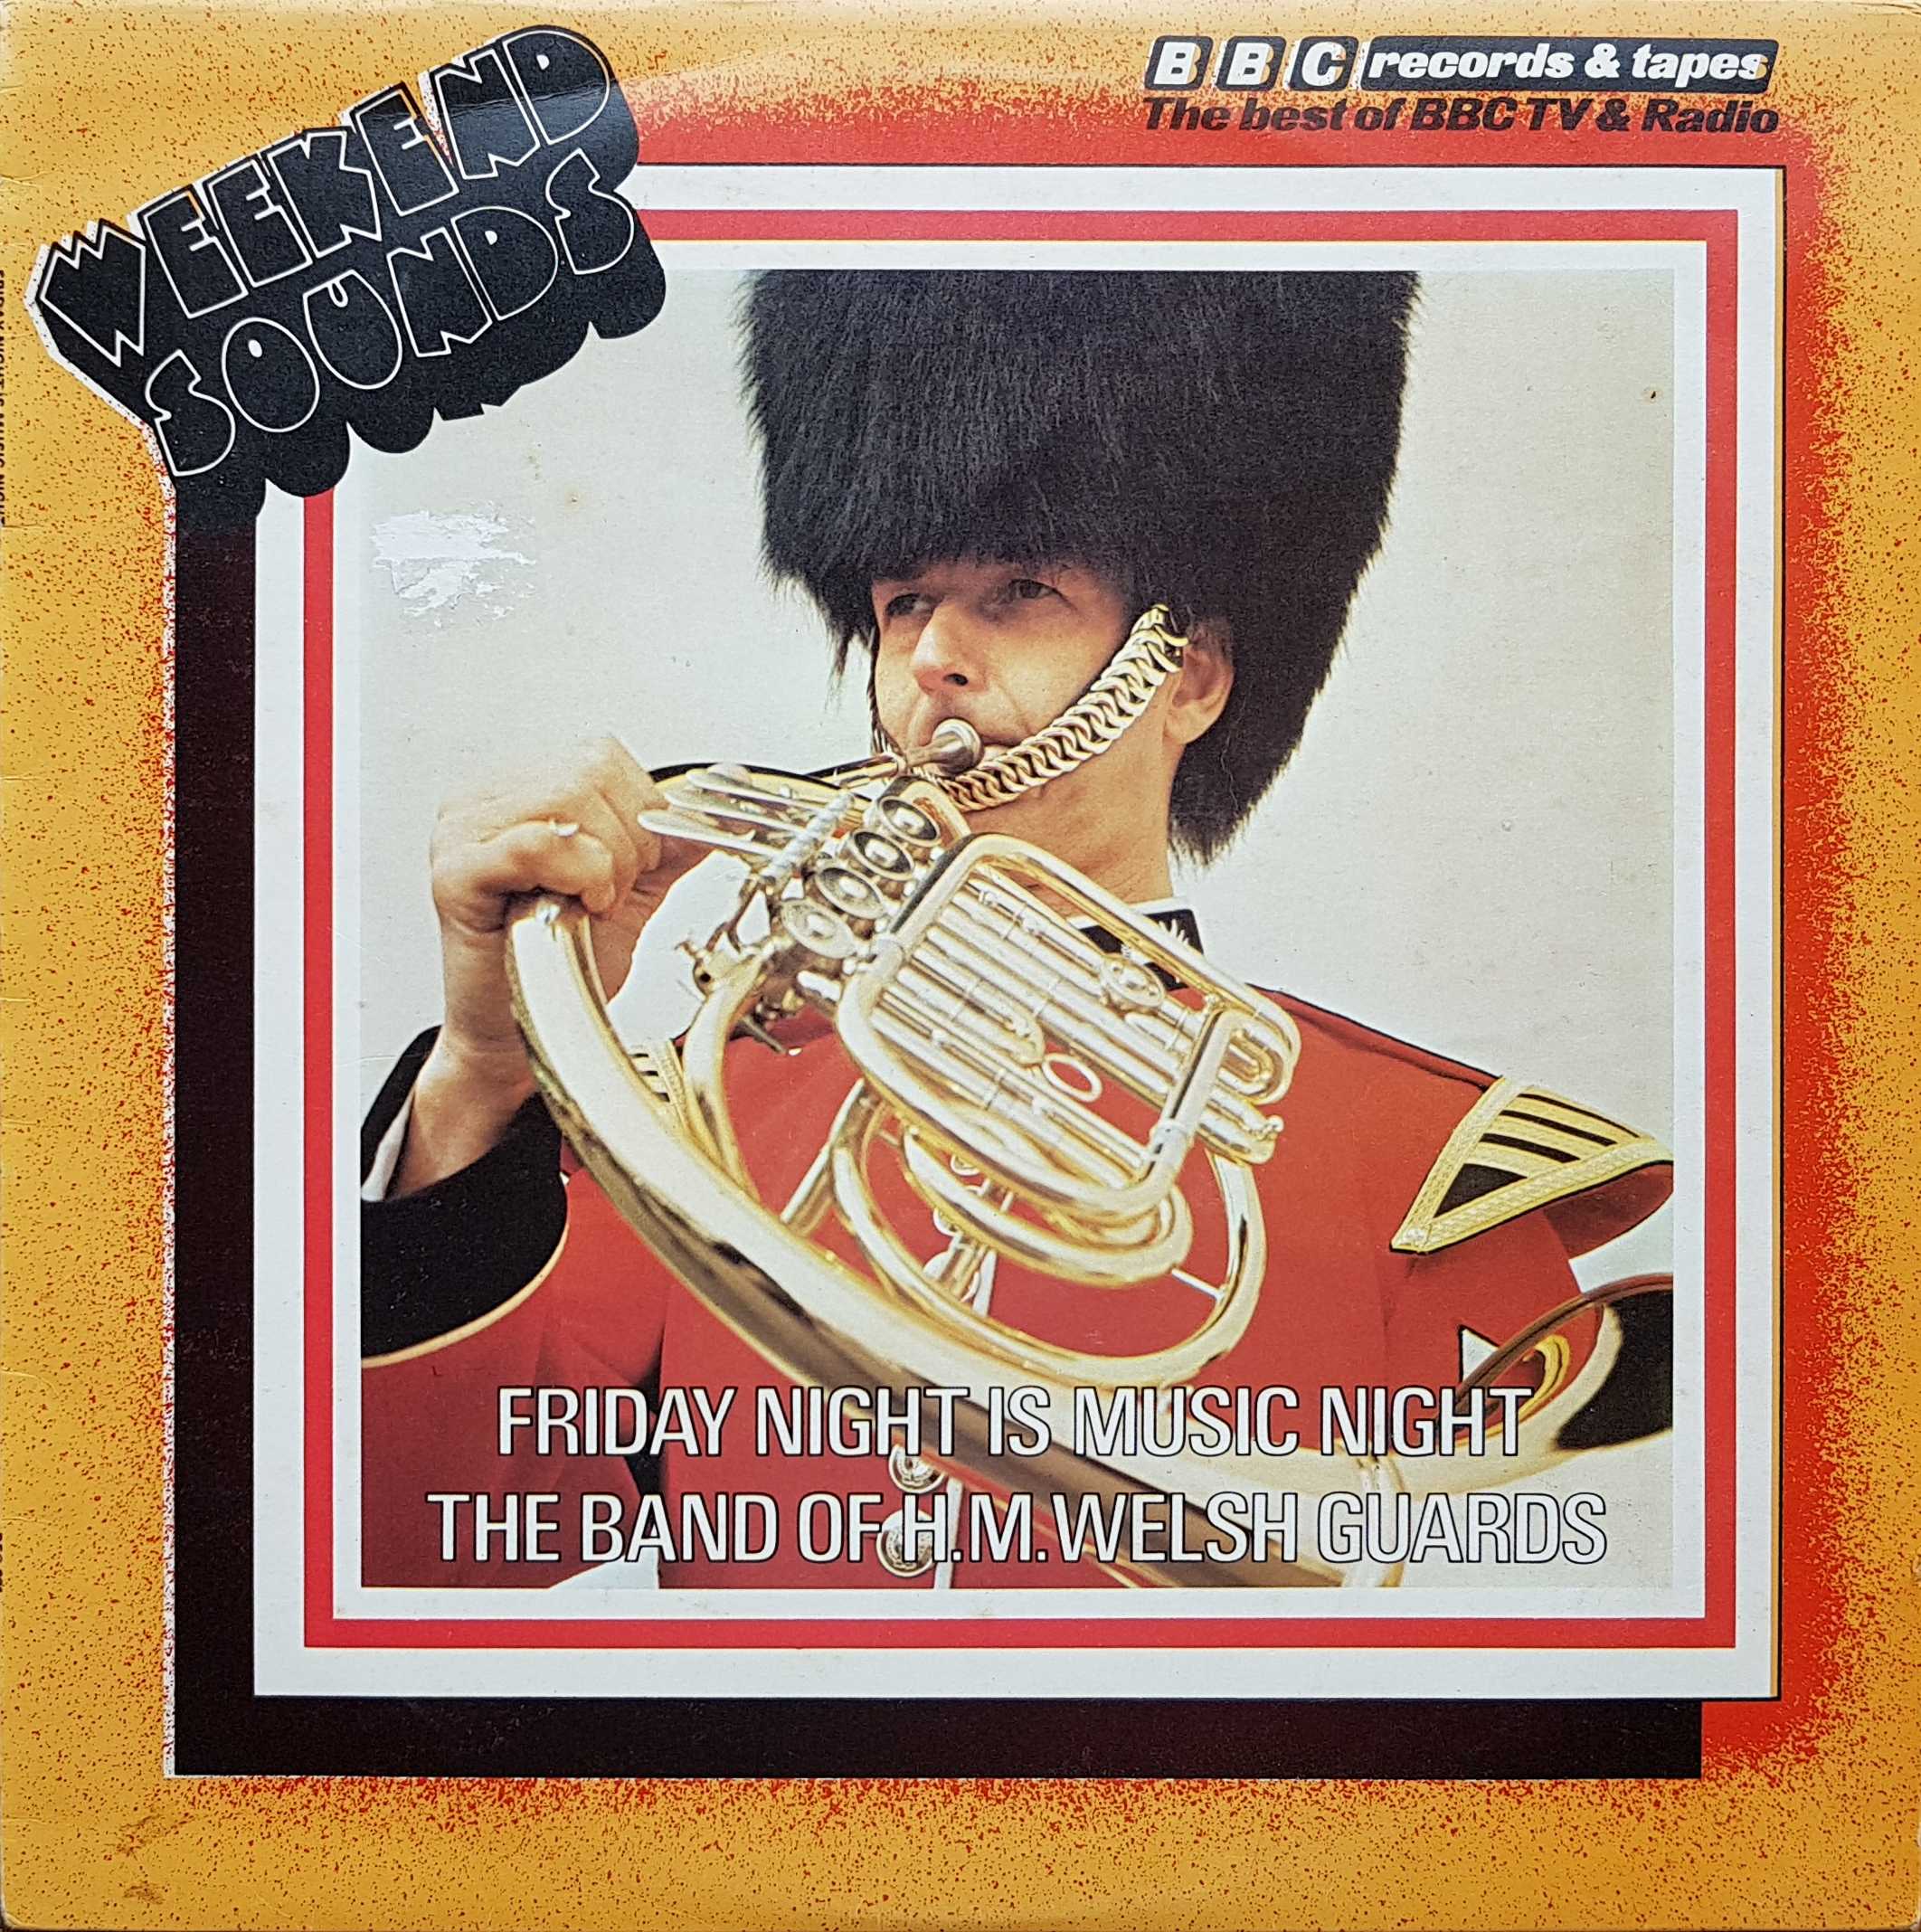 Picture of REC 281 Friday night is music night by artist The band of the Welsh guards from the BBC albums - Records and Tapes library